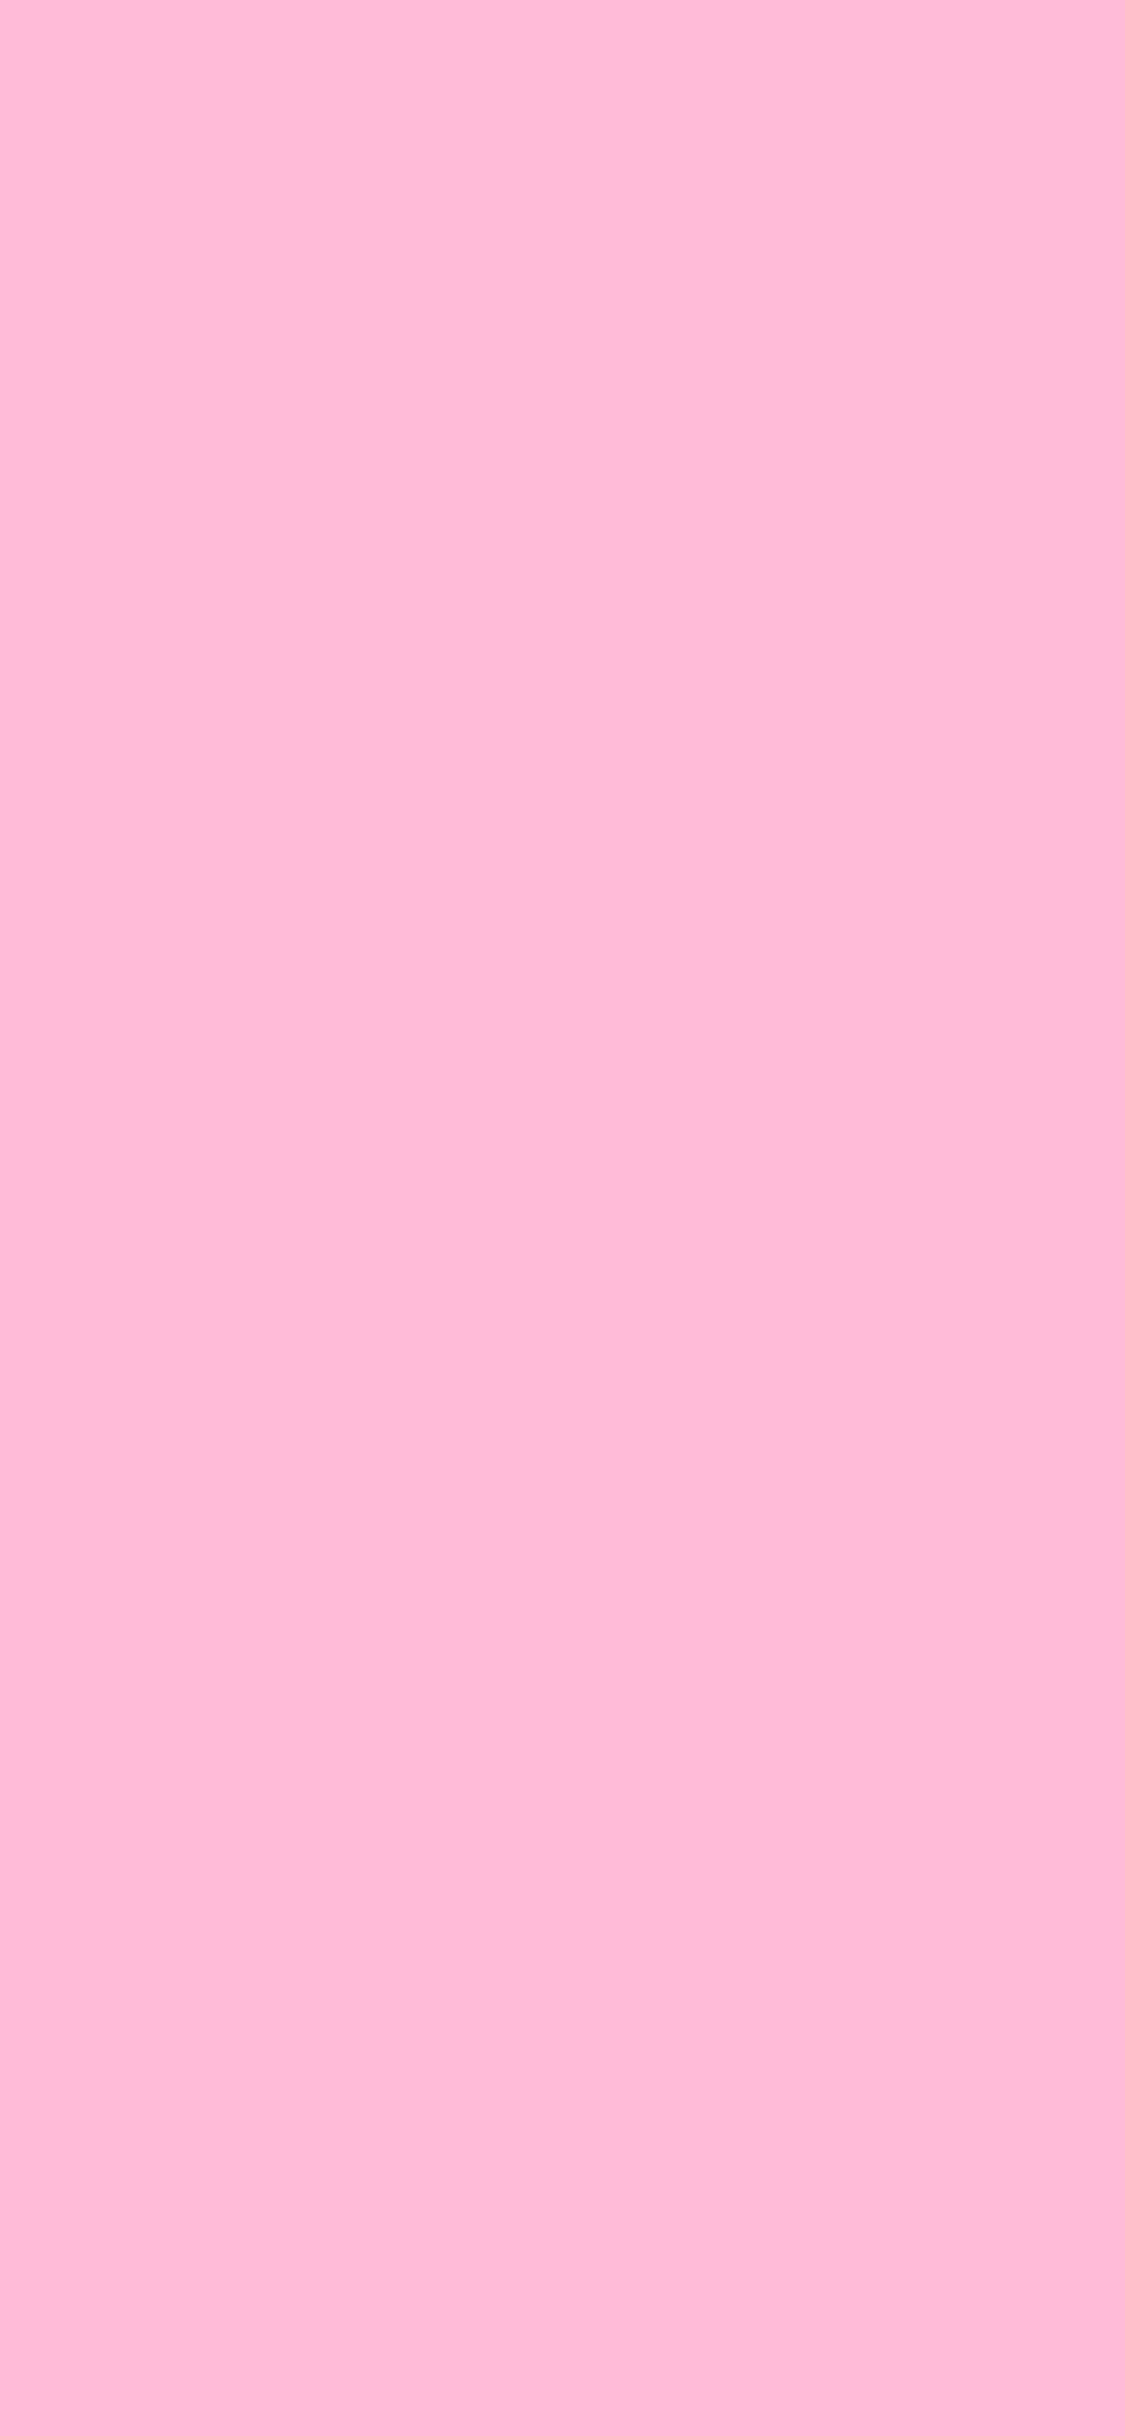 1125x2436 Cotton Candy Solid Color Background